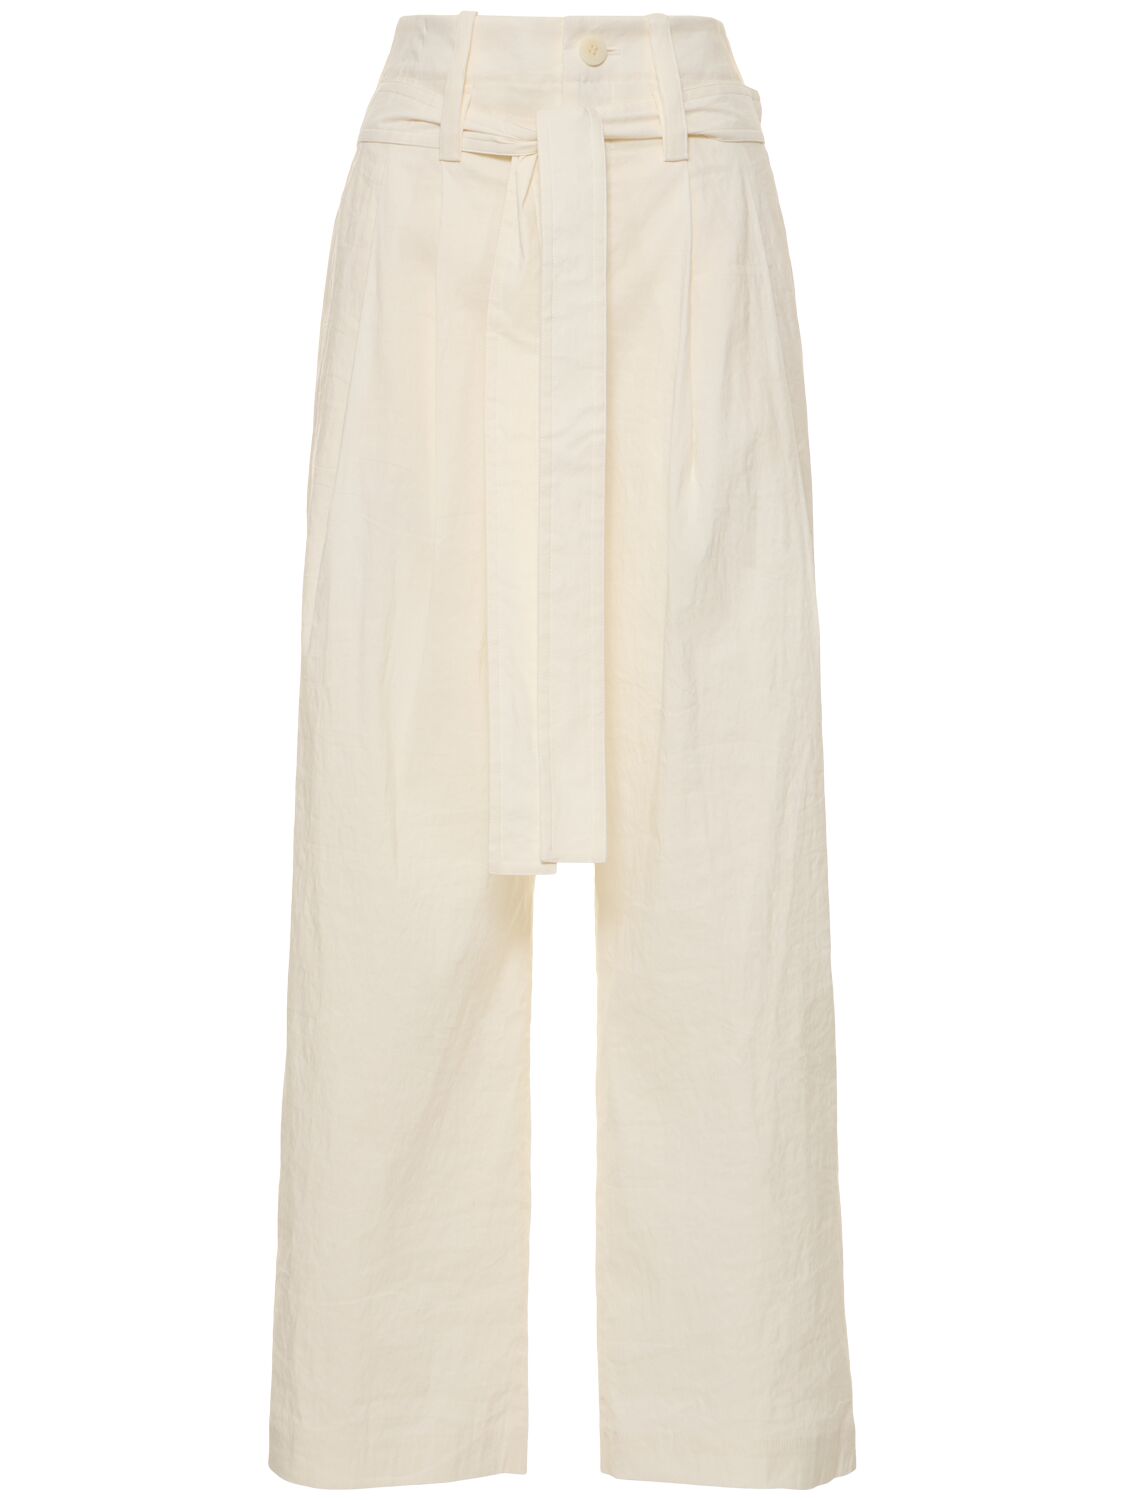 Issey Miyake Belted Linen Blend Pants In White